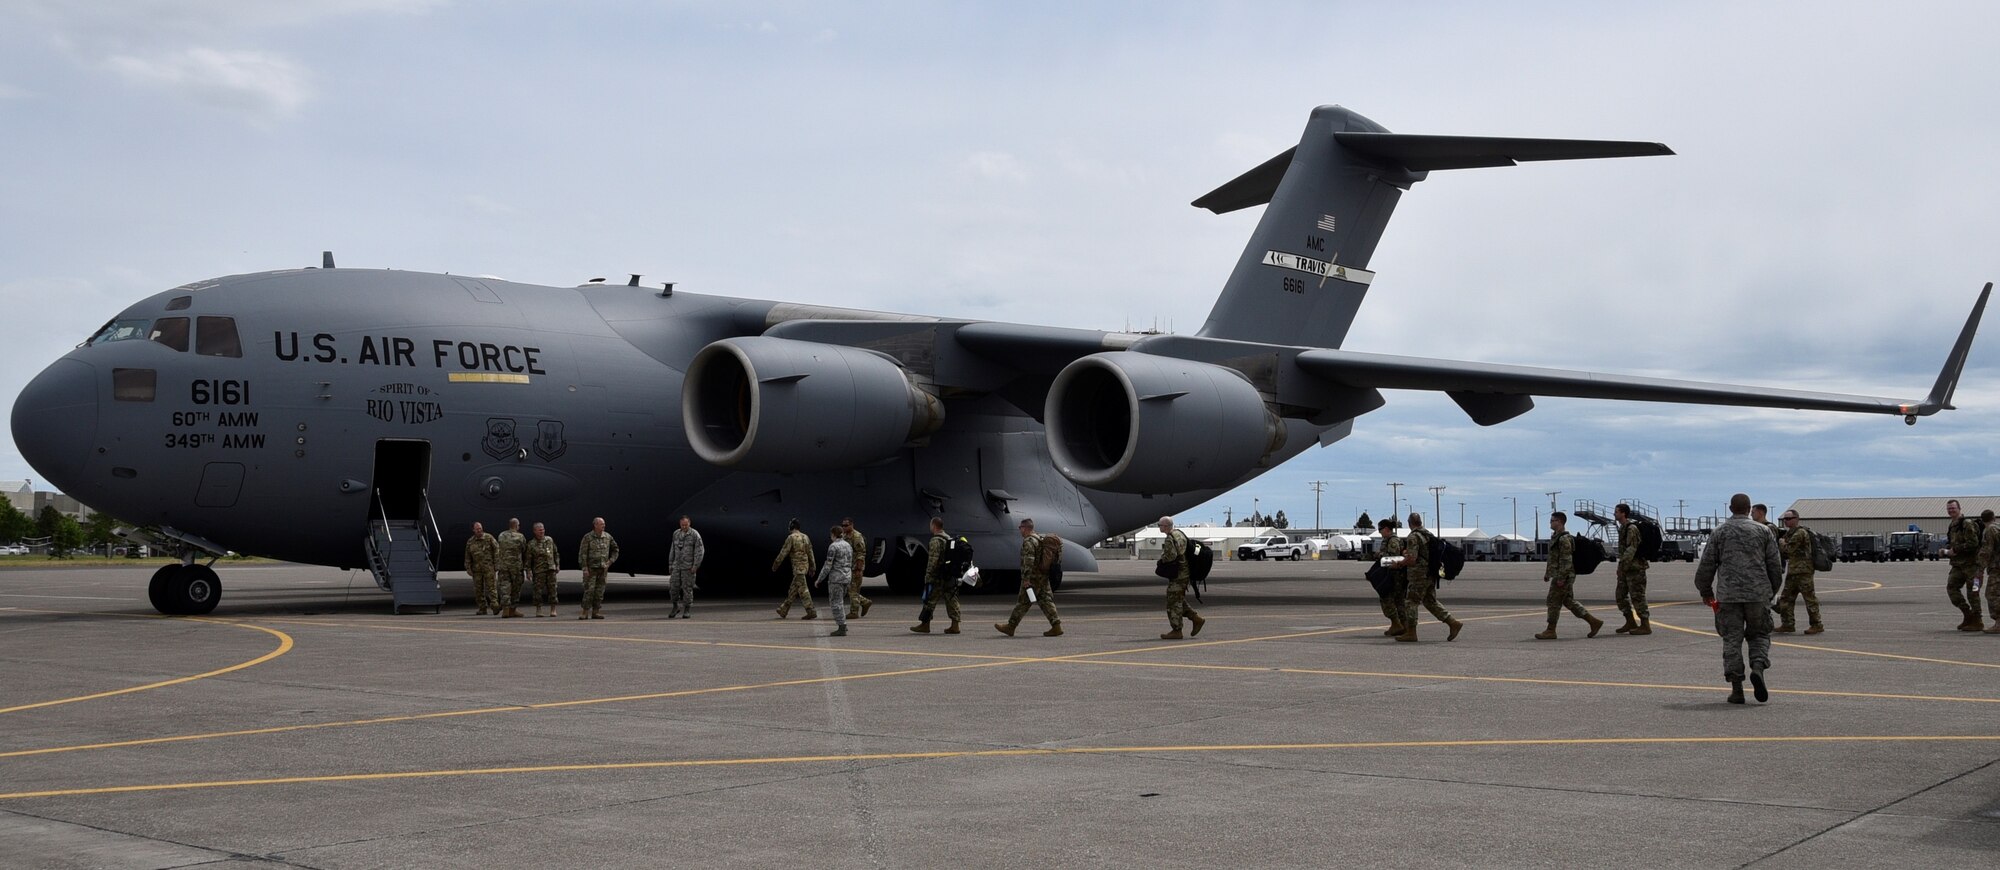 Airmen from the 120th Airlift Wing board a C-17 from Travis Air Force Base June 28, 2019 that took them to Southwest Asia. Approximately 130 Airmen and four C-130s will spend four months on this deployment.